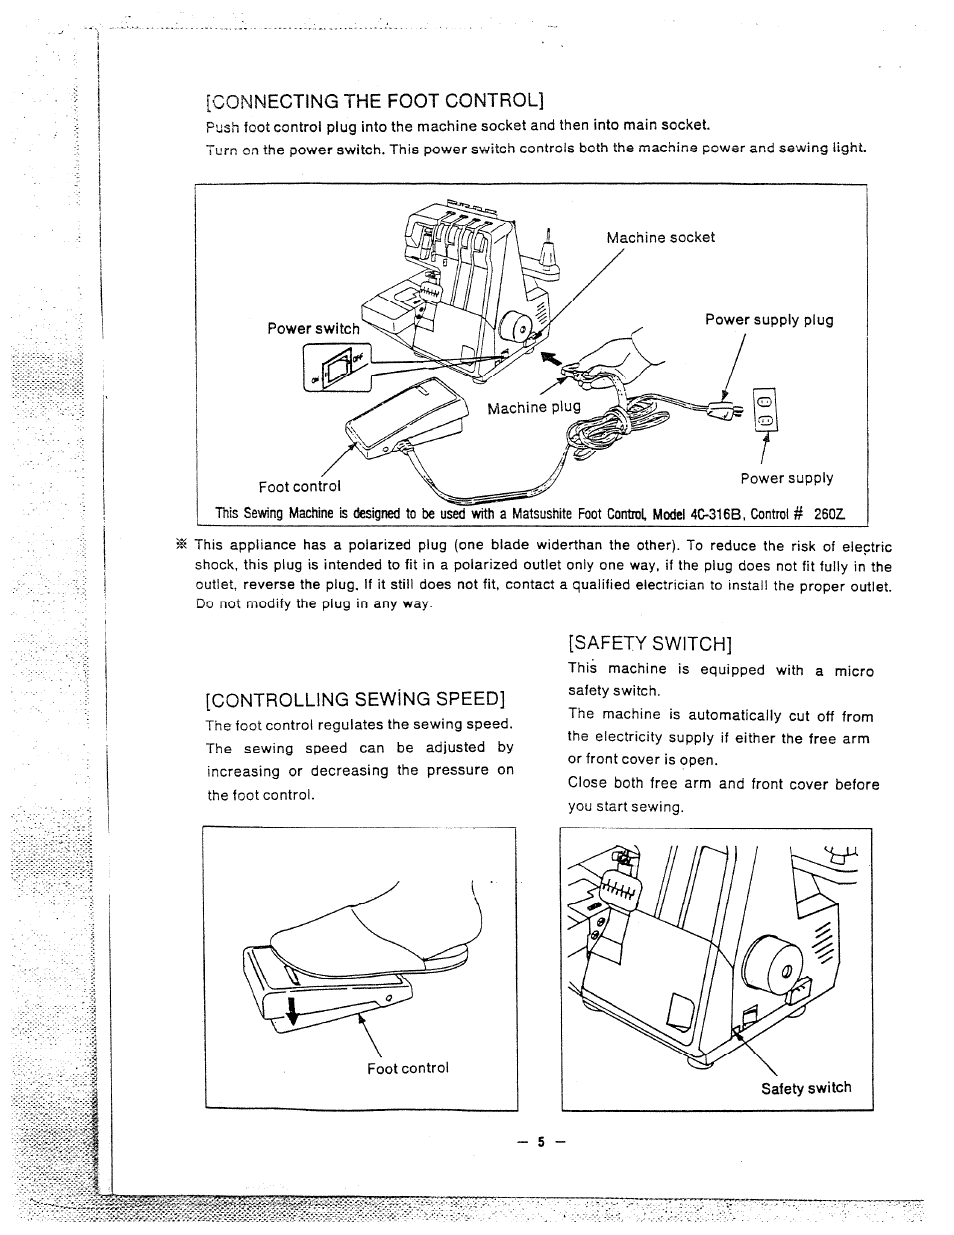 Connecting the foot control, Controlling sewlng speed, Safety switch | SINGER W1600 User Manual | Page 6 / 28